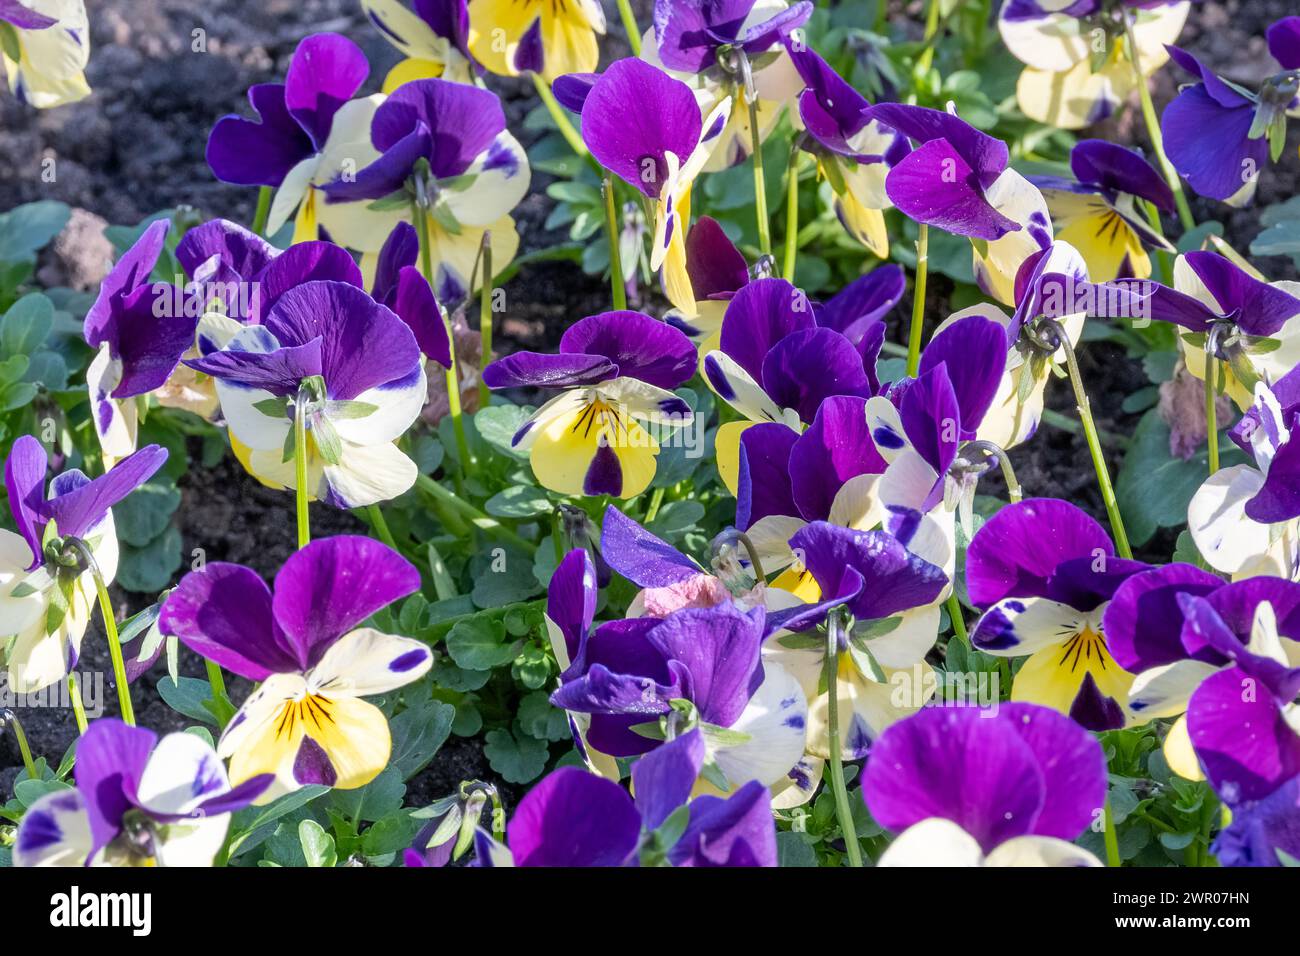 densely planted horned violets in spring Stock Photo